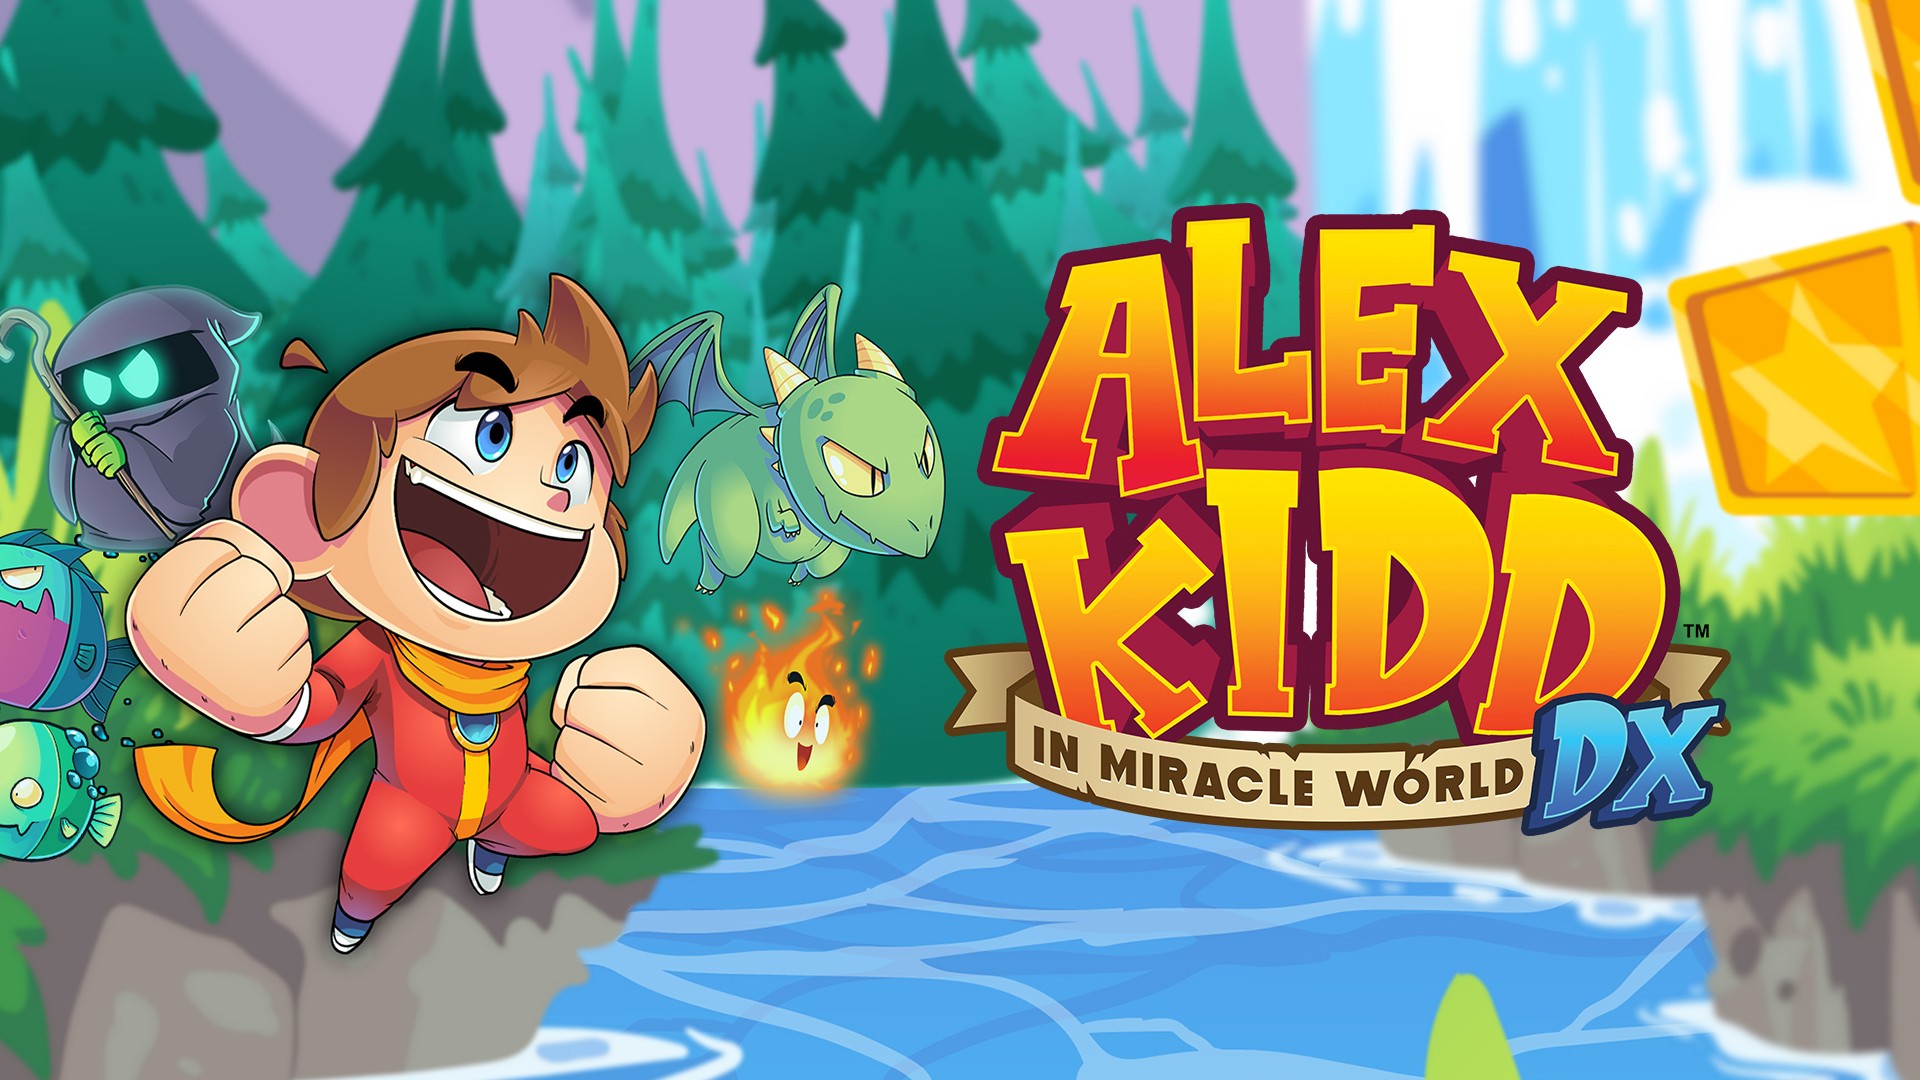 alex-kidd-in-miracle-world-dx-analise-jogoveio